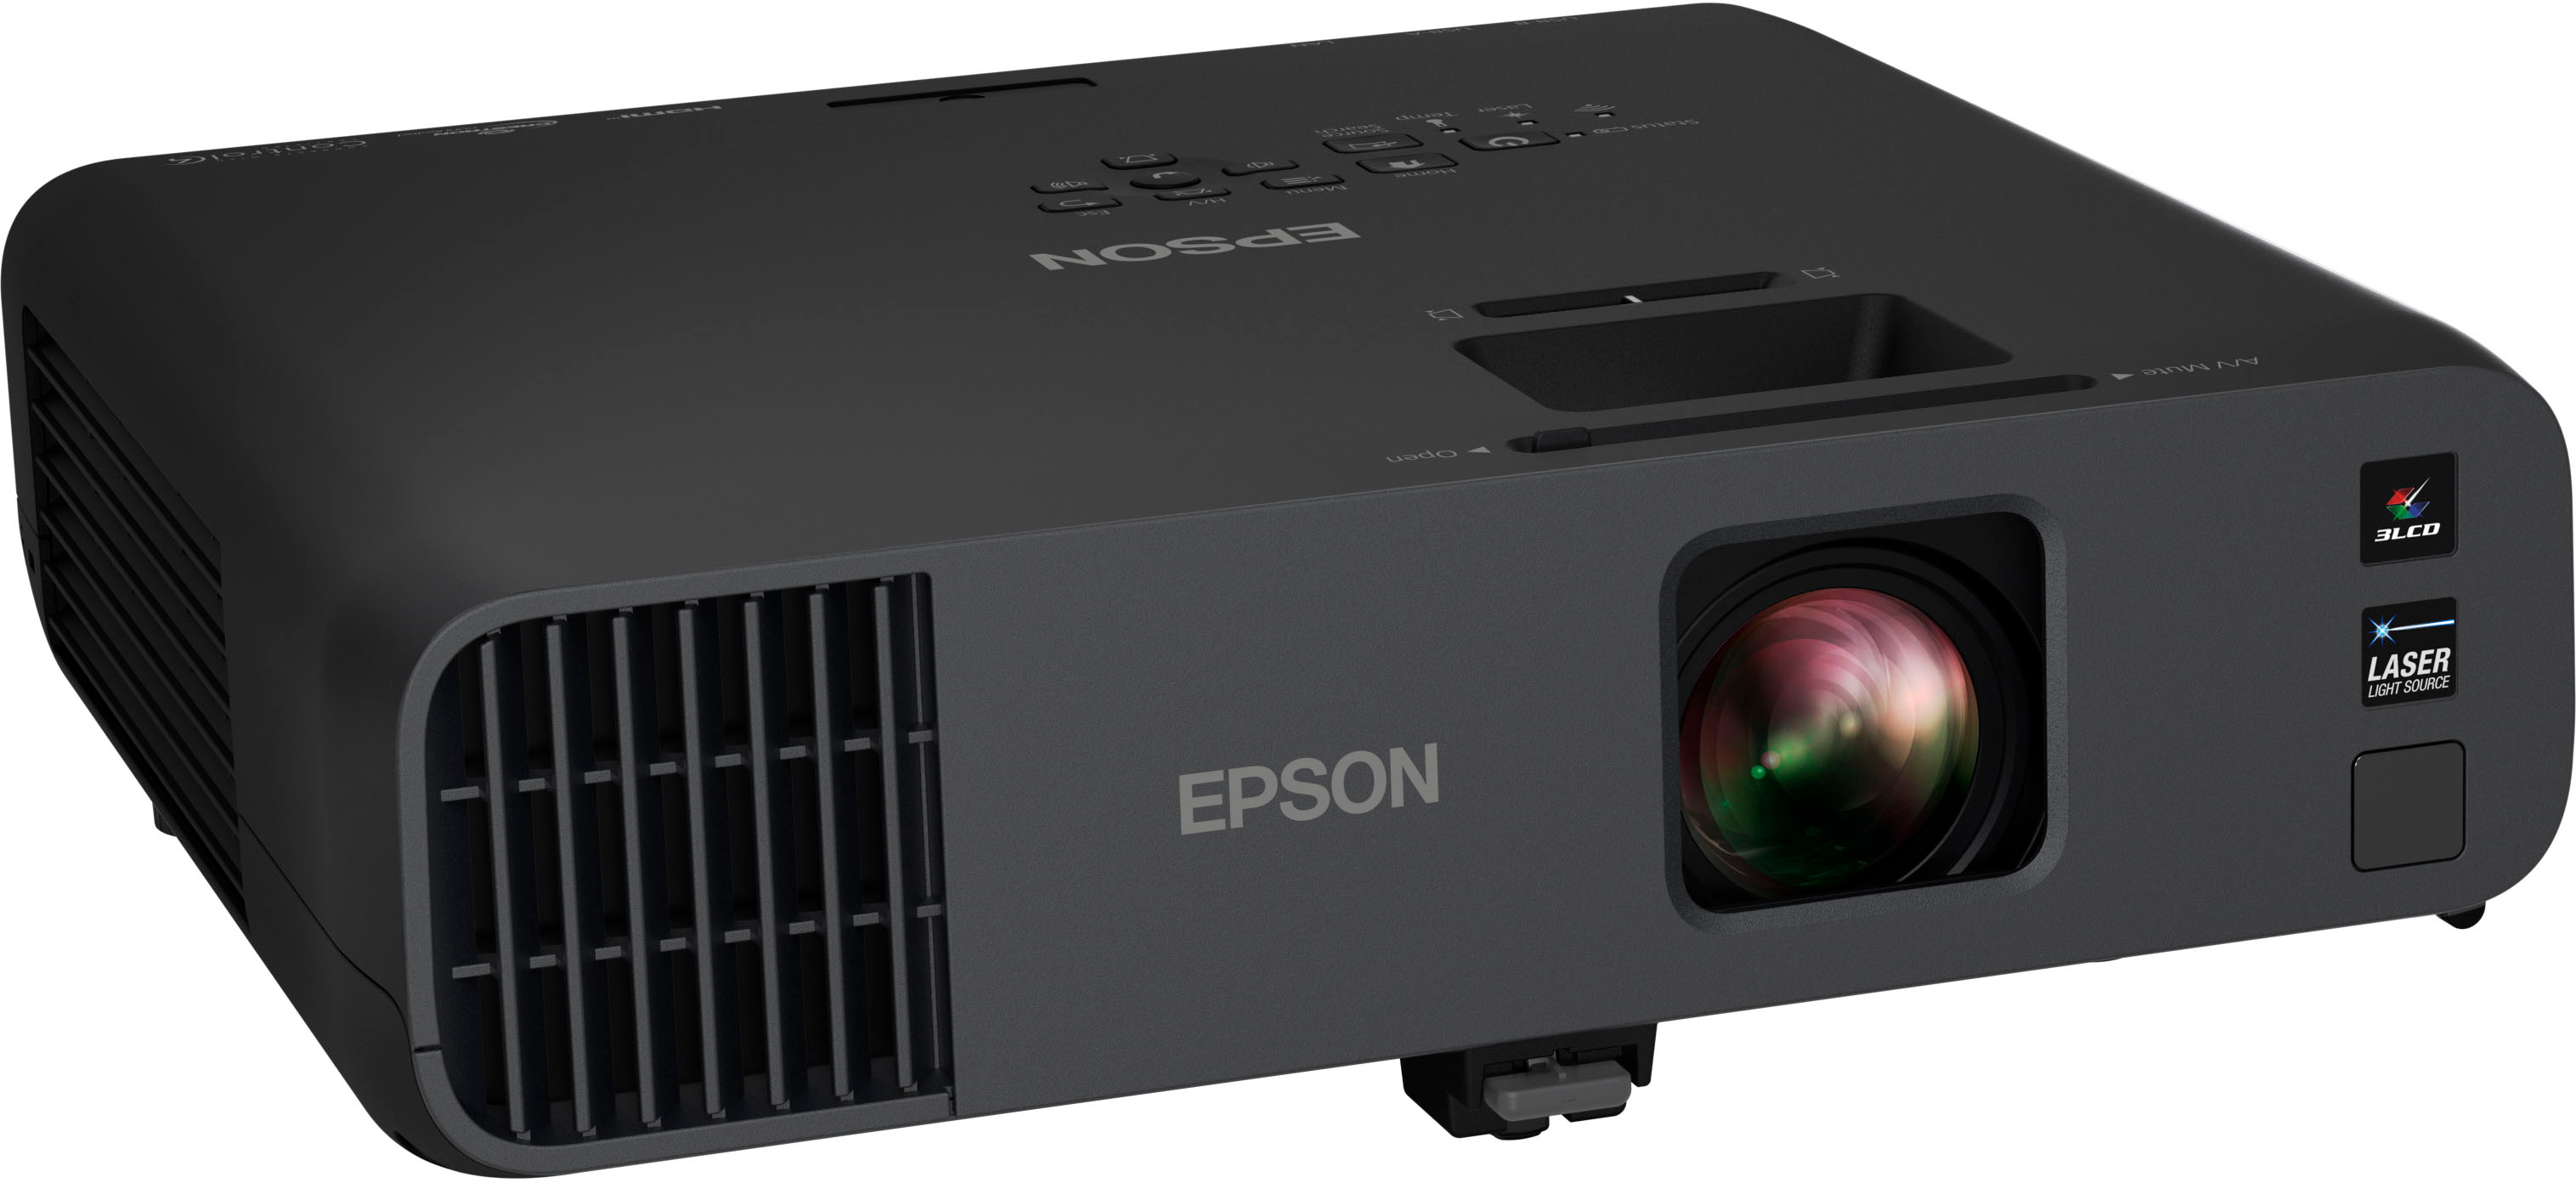 Angle View: Epson - Pro EX11000 3LCD Full HD 1080p Wireless Laser Projector - Black